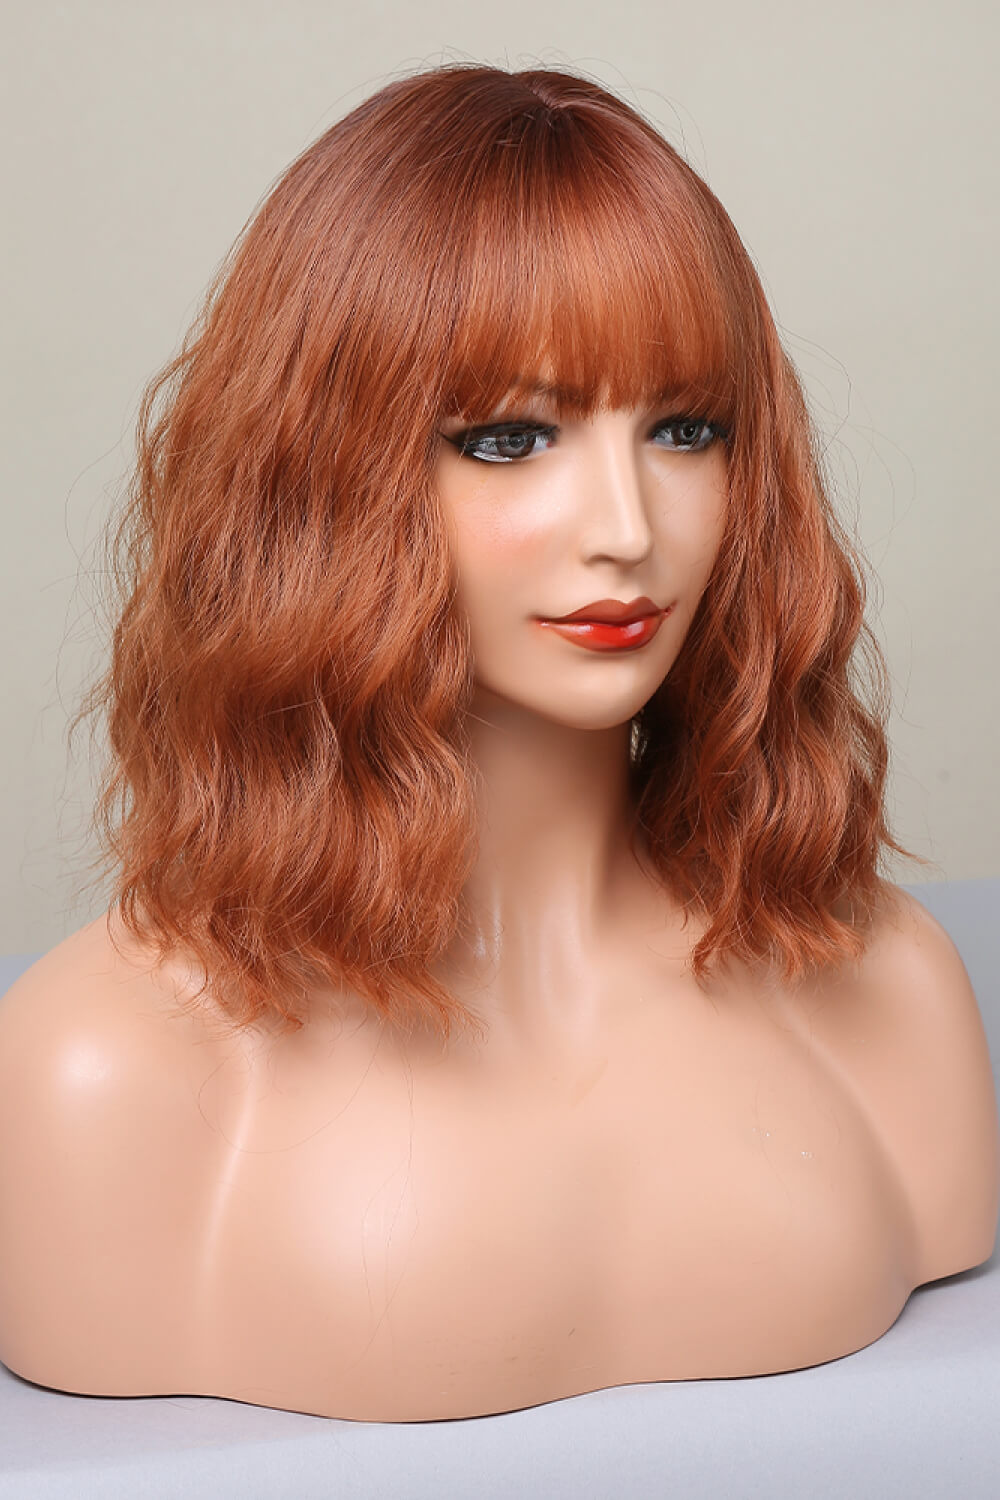 Chic Bobo Wave Synthetic Wigs 12''